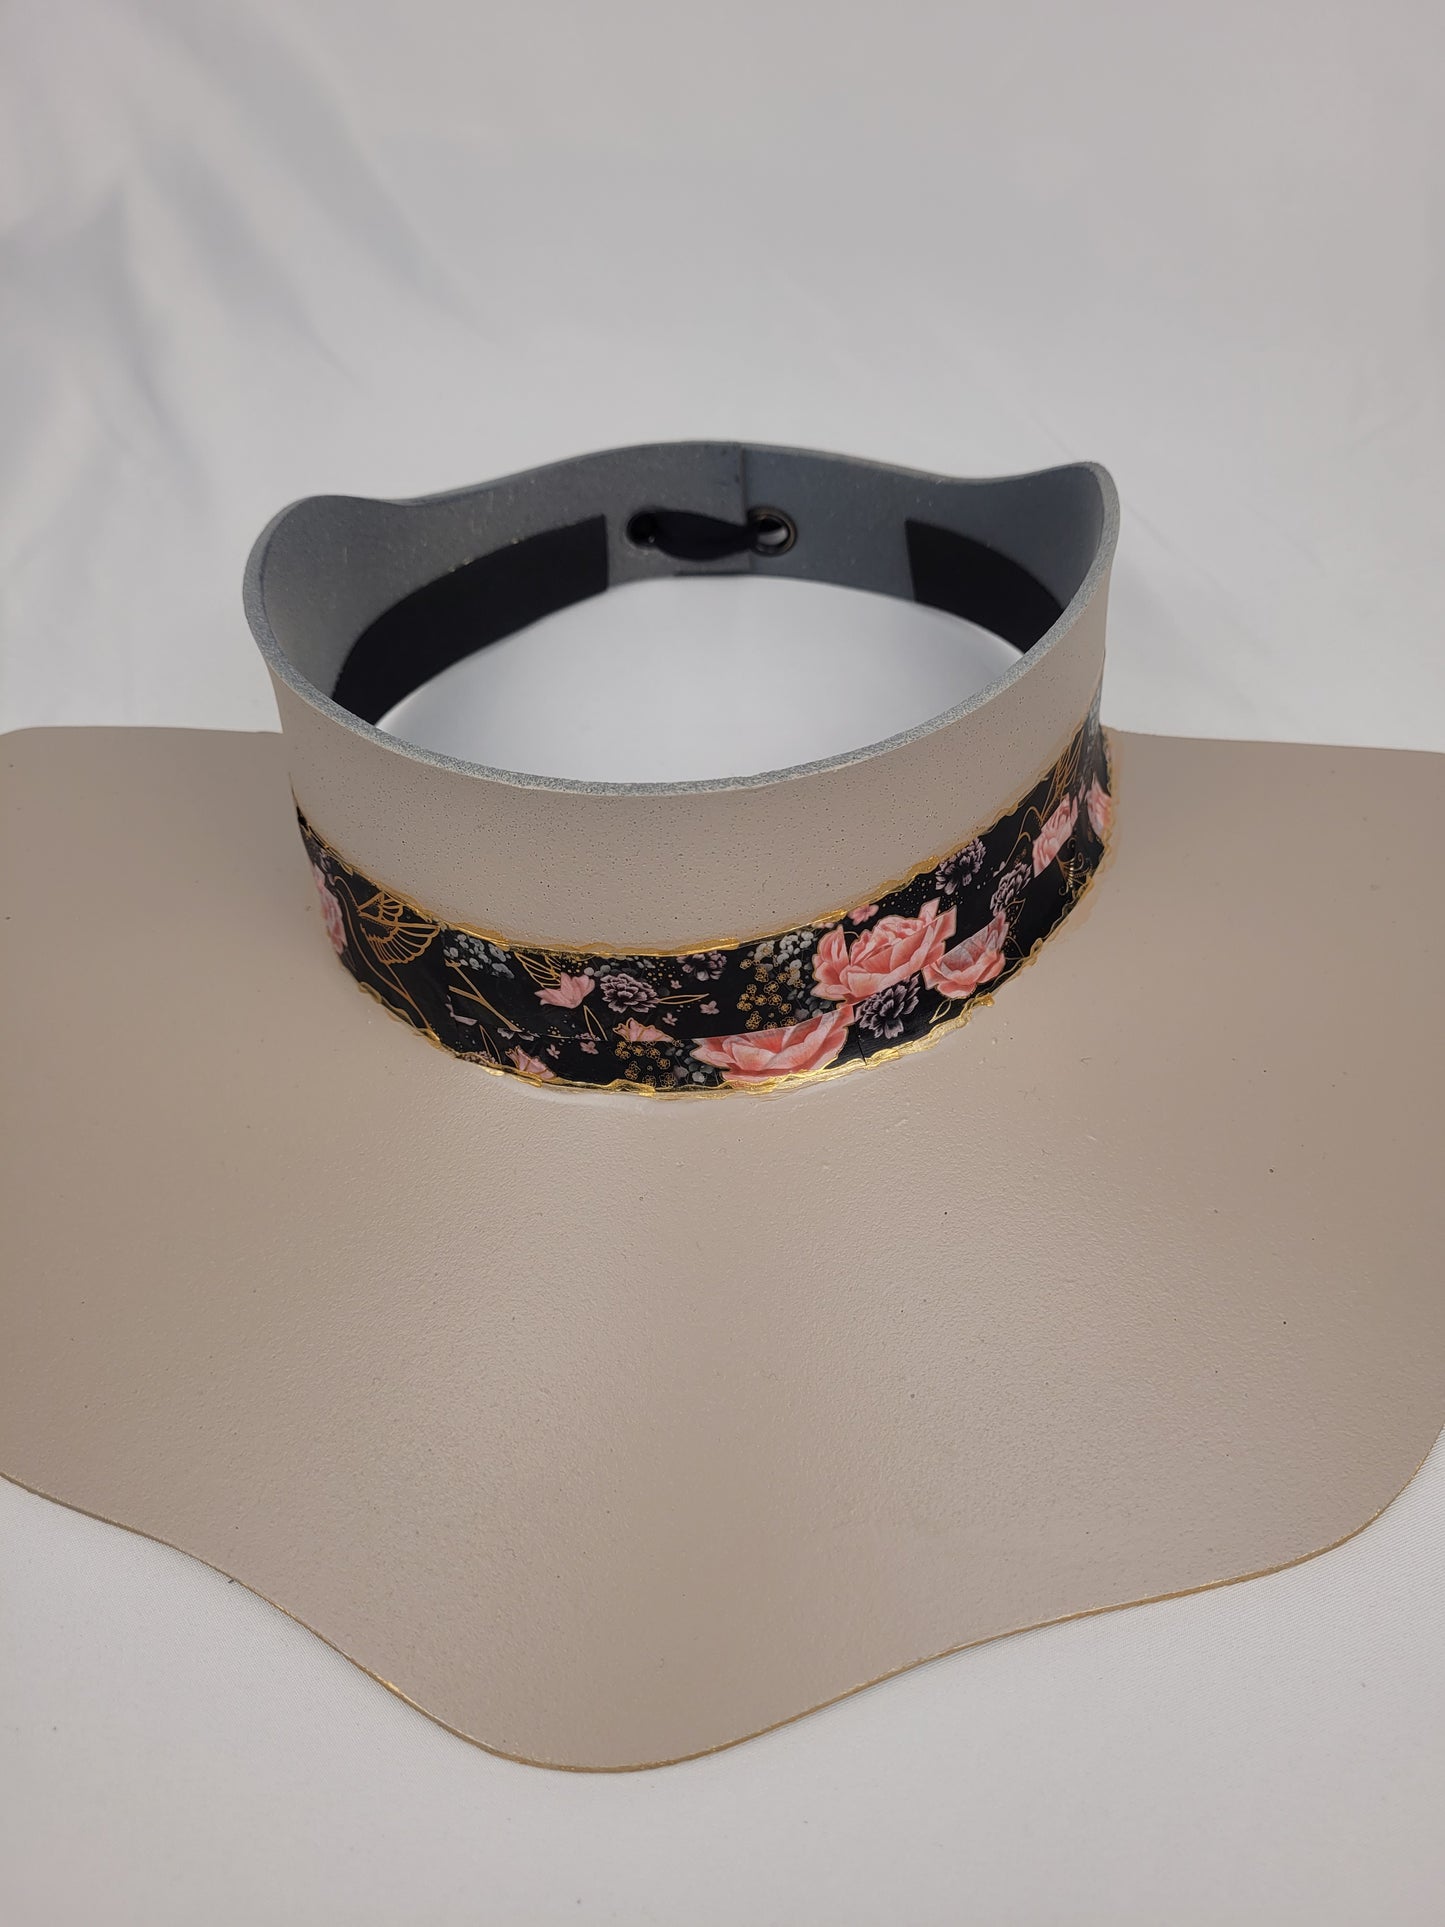 Elegant Taupe Lotus Sun Visor Hat with Sophisticated Black and Golden Band: Sport, Golf, Everyday Protection